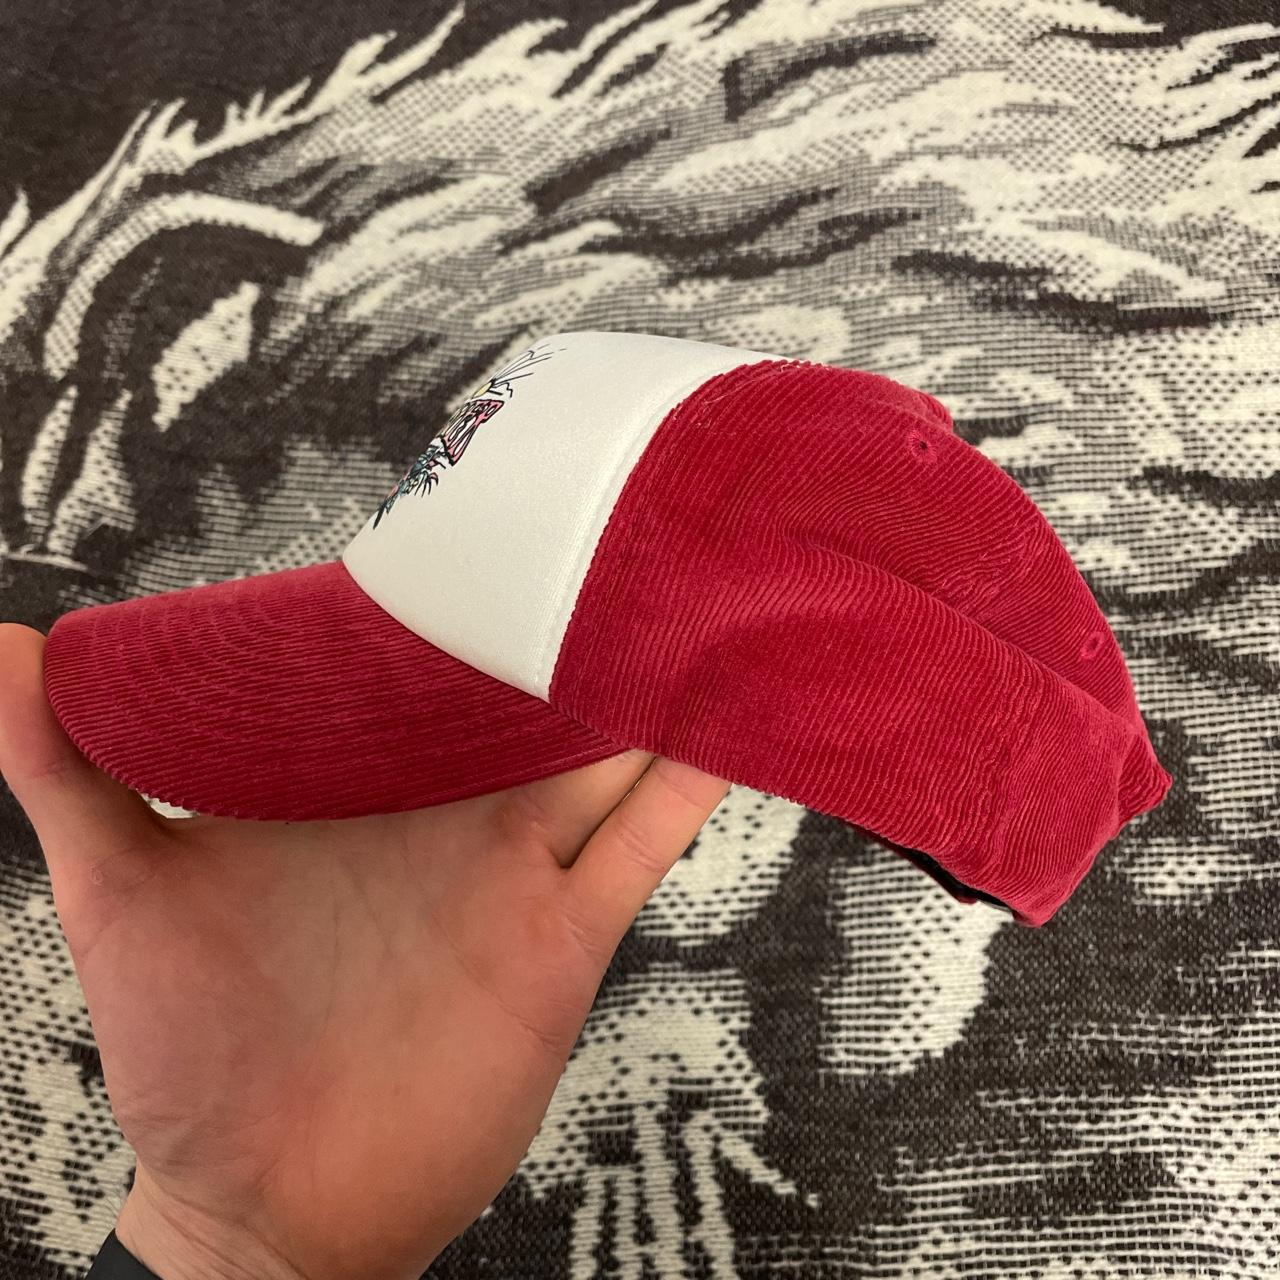 Quiksilver Men's Red and White Hat (2)